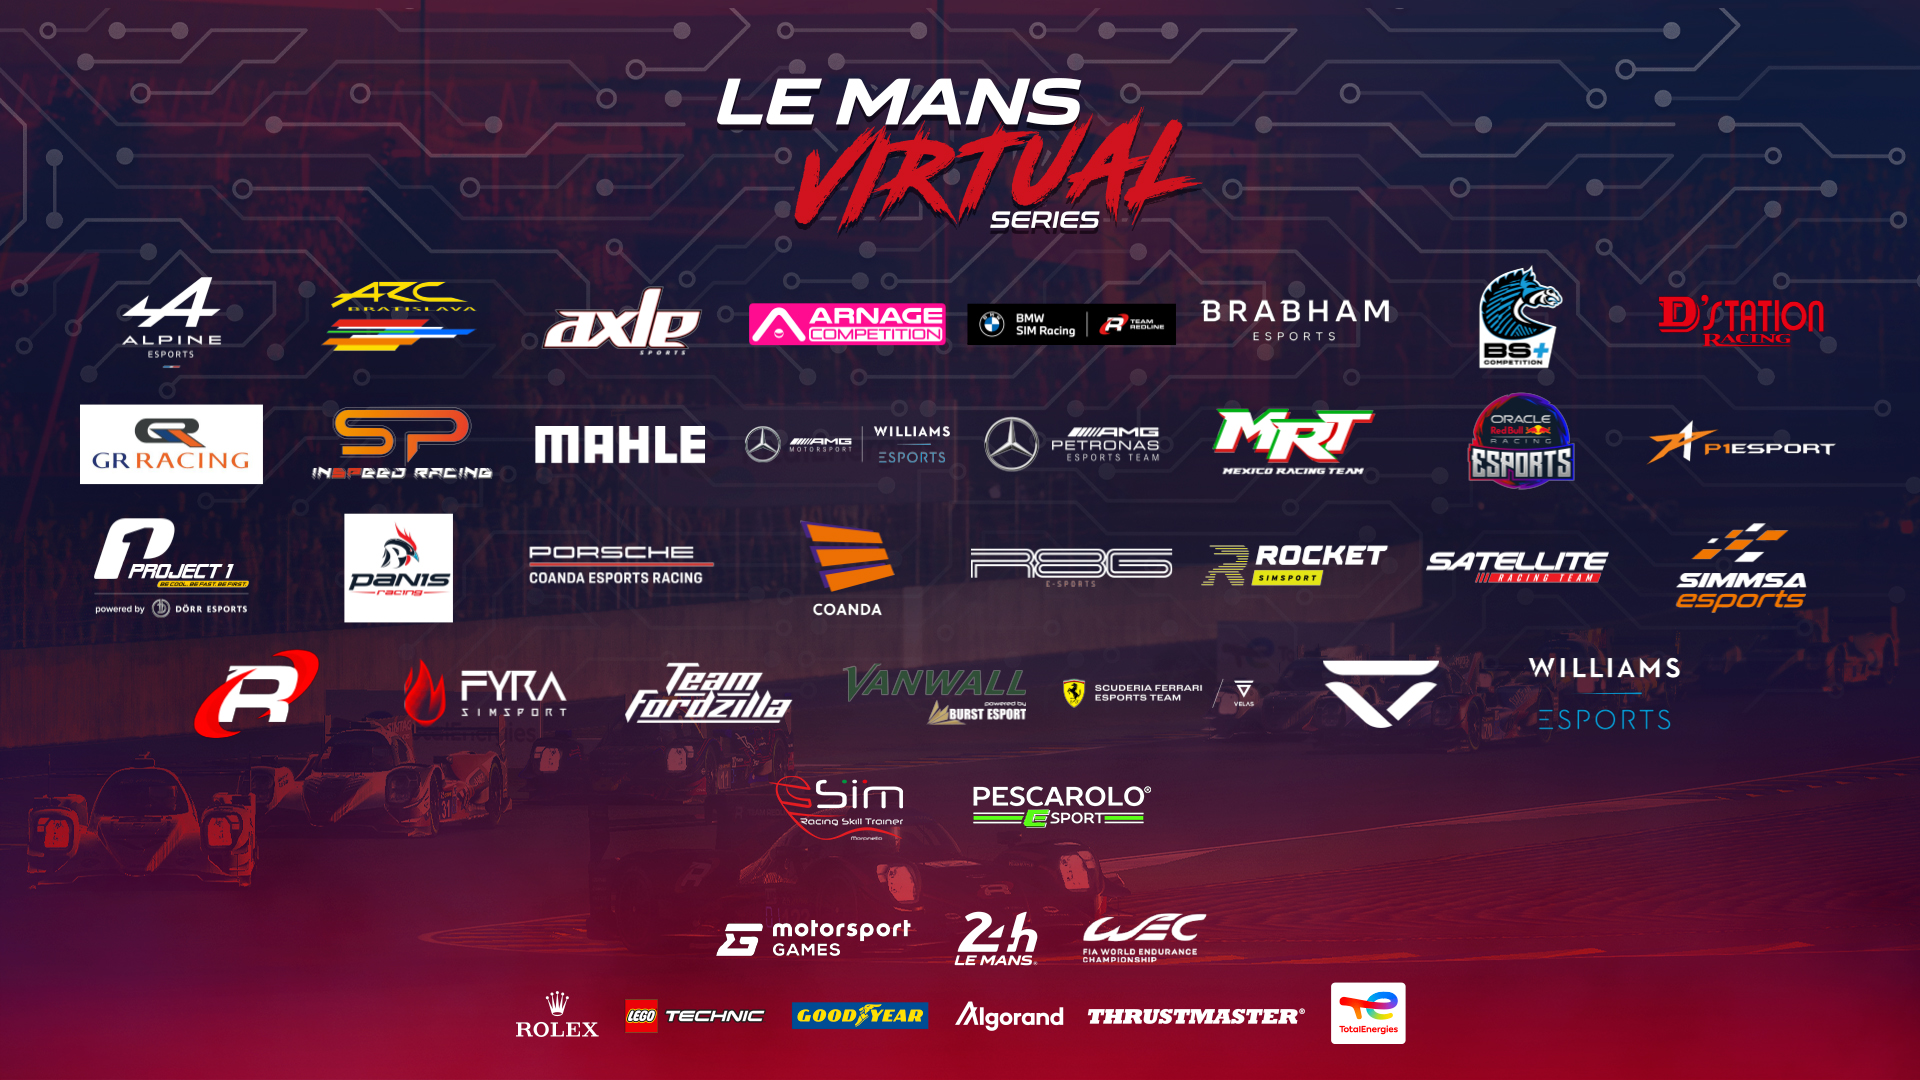 Le Mans Virtual Series 2022-23 reaches wider worldwide audience